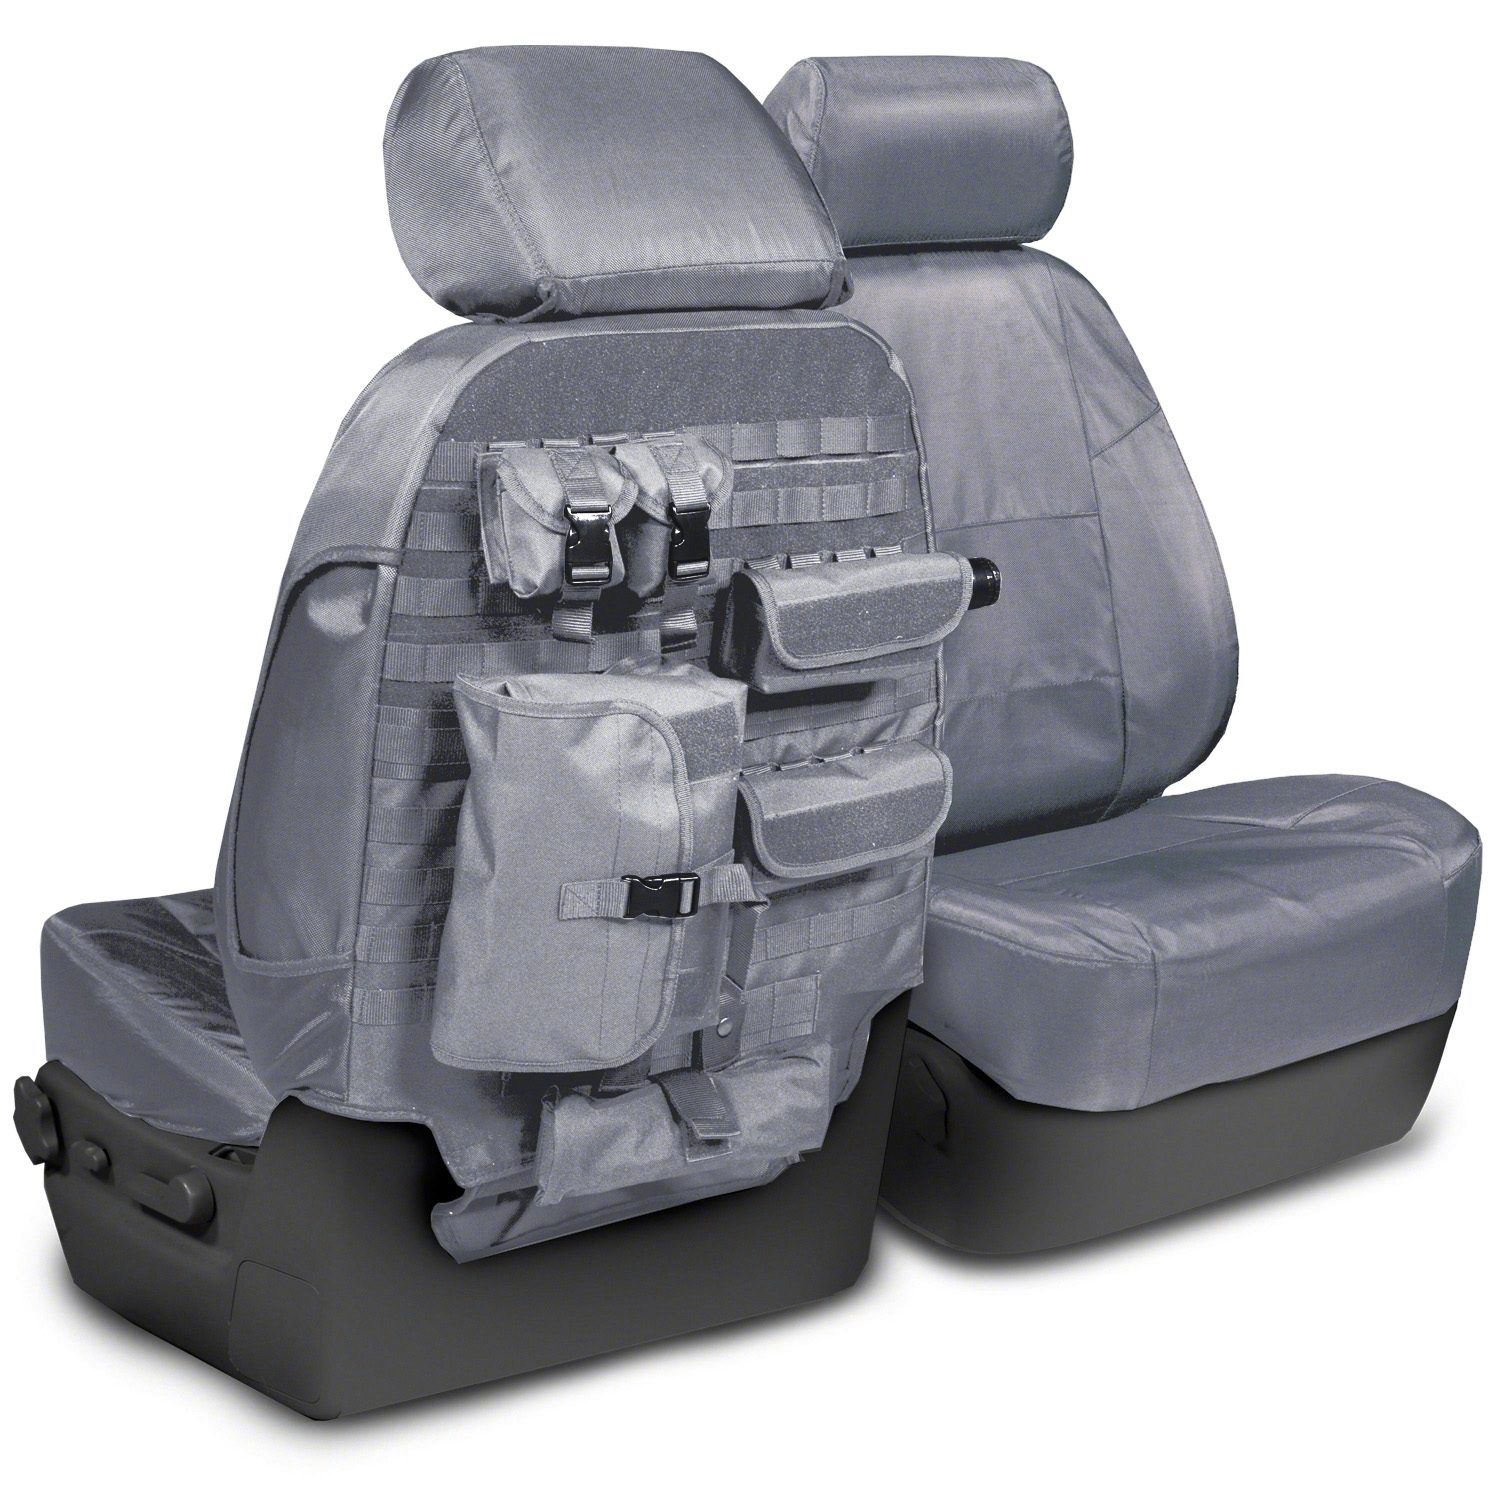 Durafit Covers offers custom fit car seat covers, including waterproof and neoprene covers, for the front sport buckets with manual controls and without side impact airbags of the Toyota 4Runner SR5.